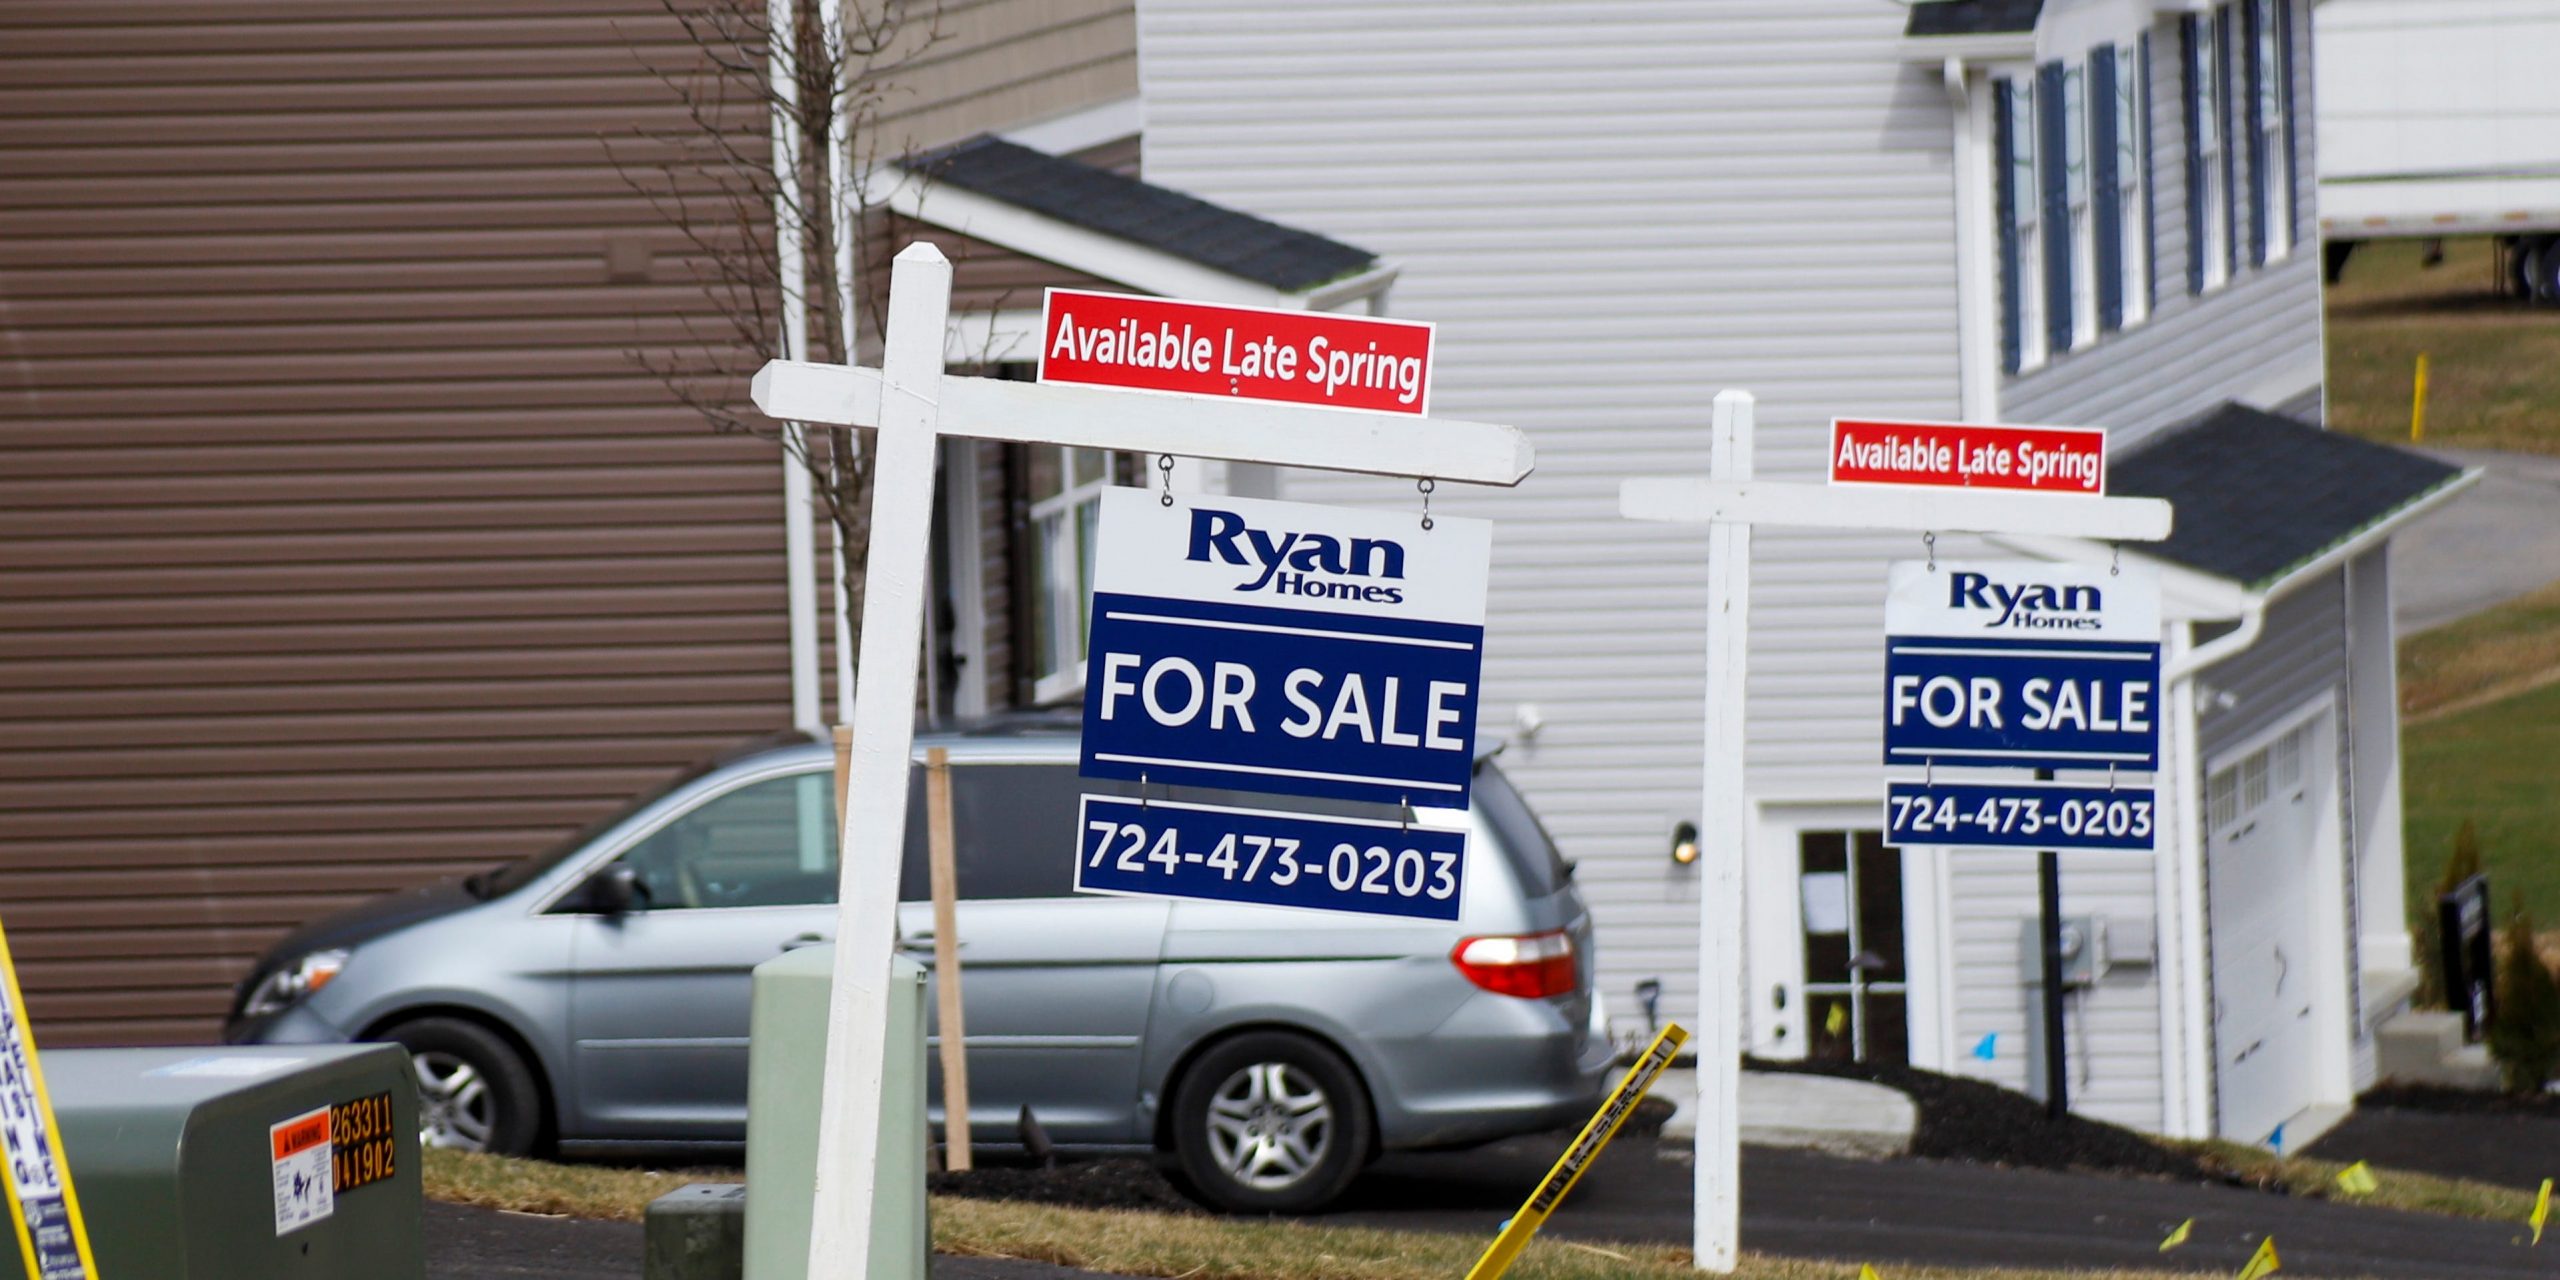 Model homes and for sale signs line the streets as construction continues at a housing plan in Zelienople, Pa., Wednesday, March 18, 2020.  U.S. new home sales fell 4.4% in February with bigger declines expected in coming months as the coronavirus puts a major crimp on home sales. (AP Photo/Keith Srakocic)